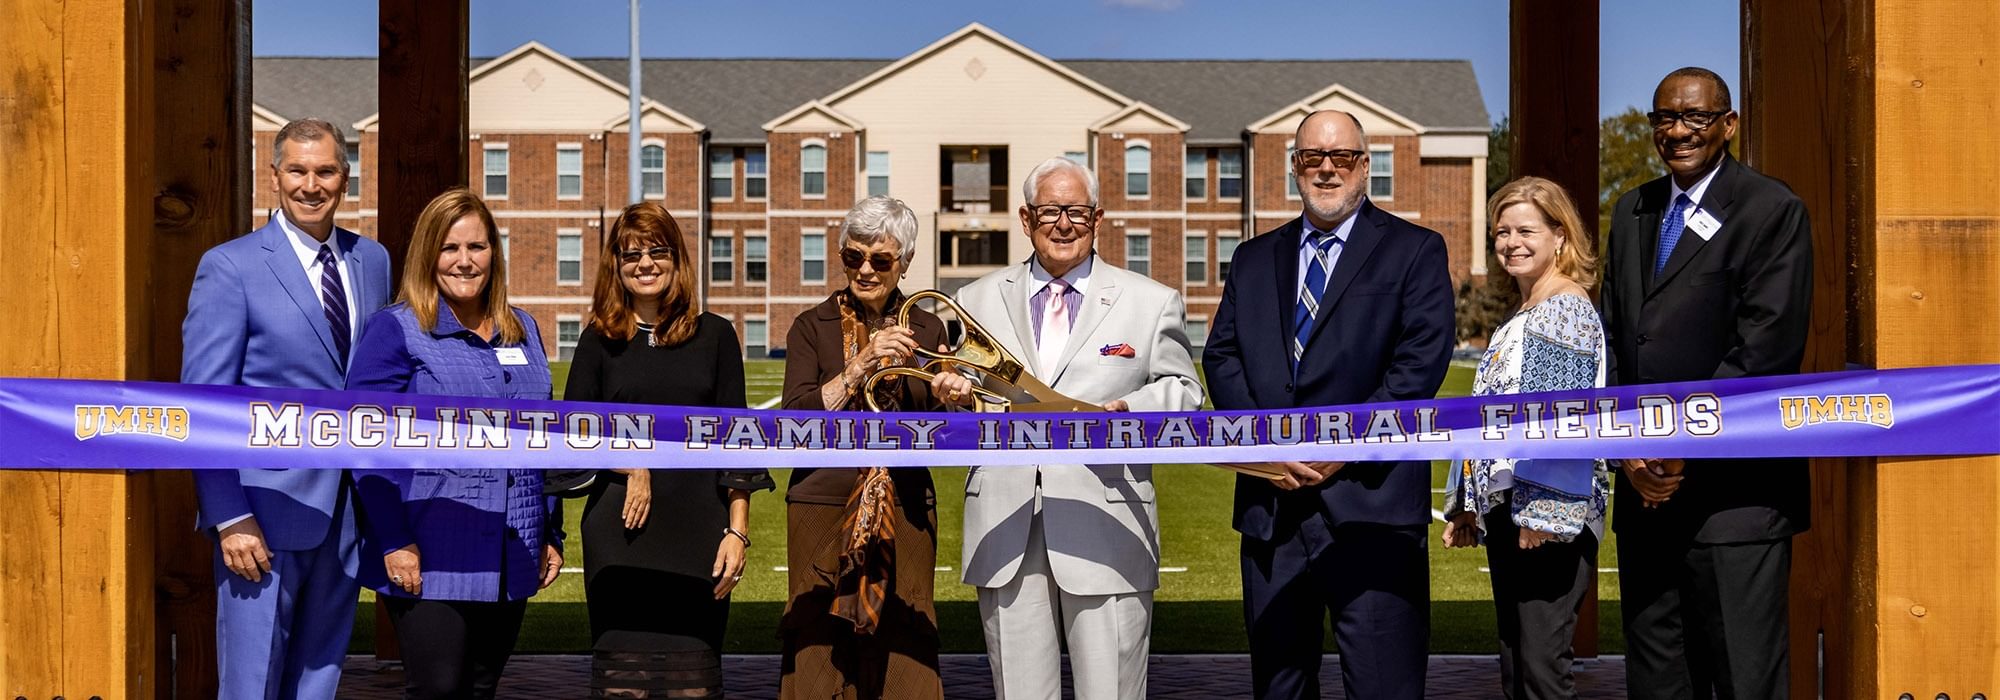 UMHB Dedicated McClinton Family Intramural Fields with Students and Special Guests